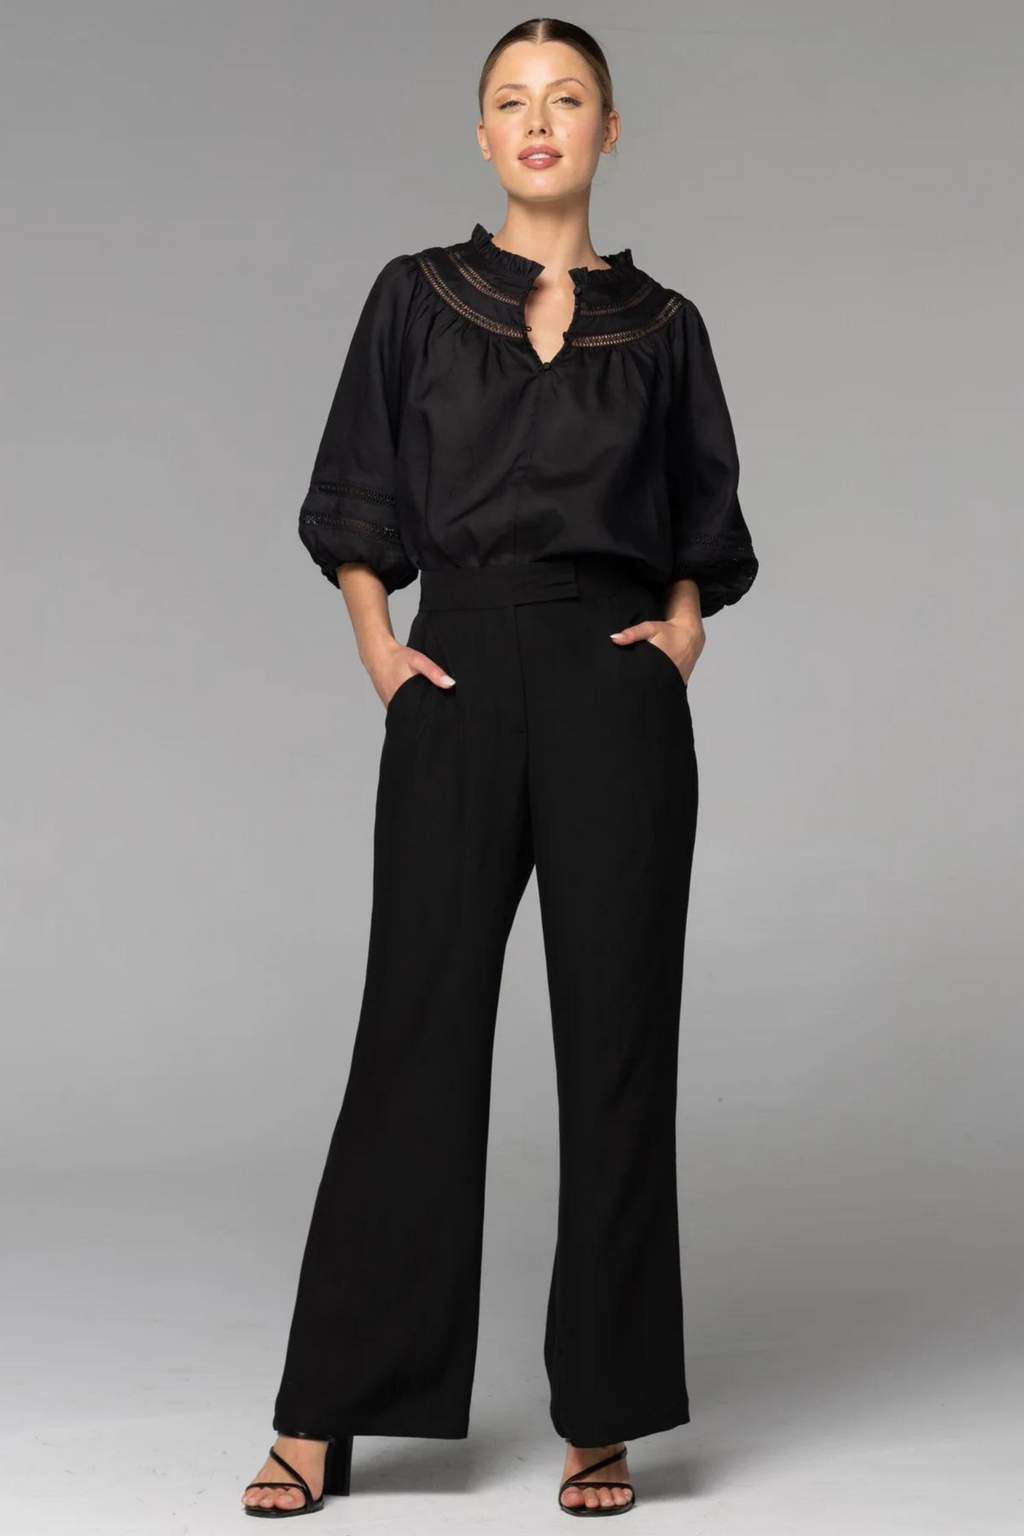 HEART AND SOUL FLARE PANT - Black